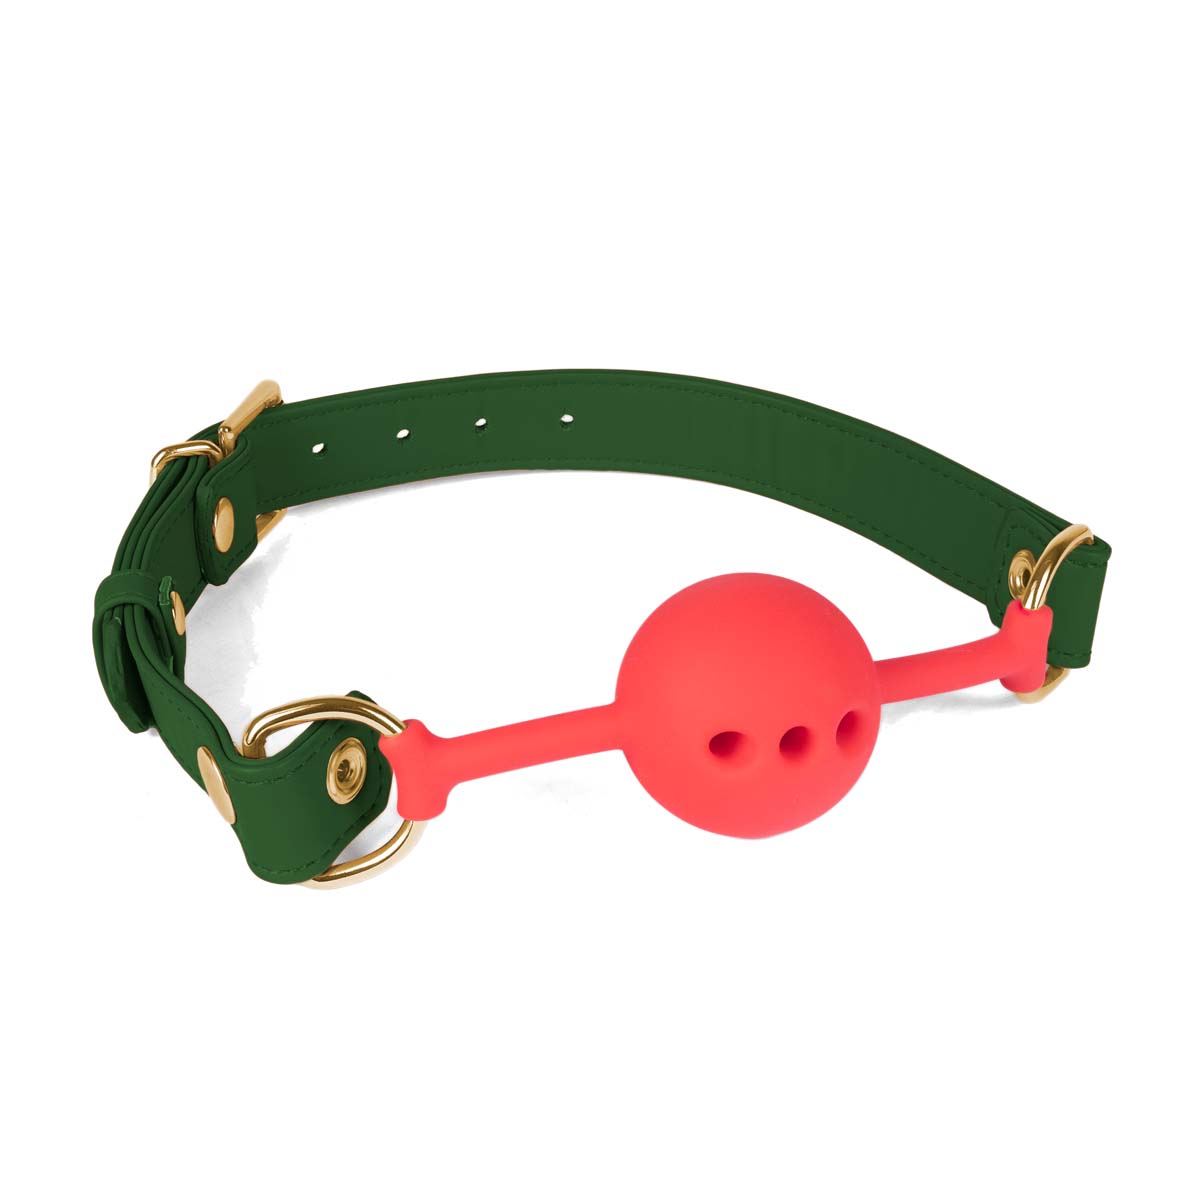 Green vegan leather gag with red ball Nudie Co